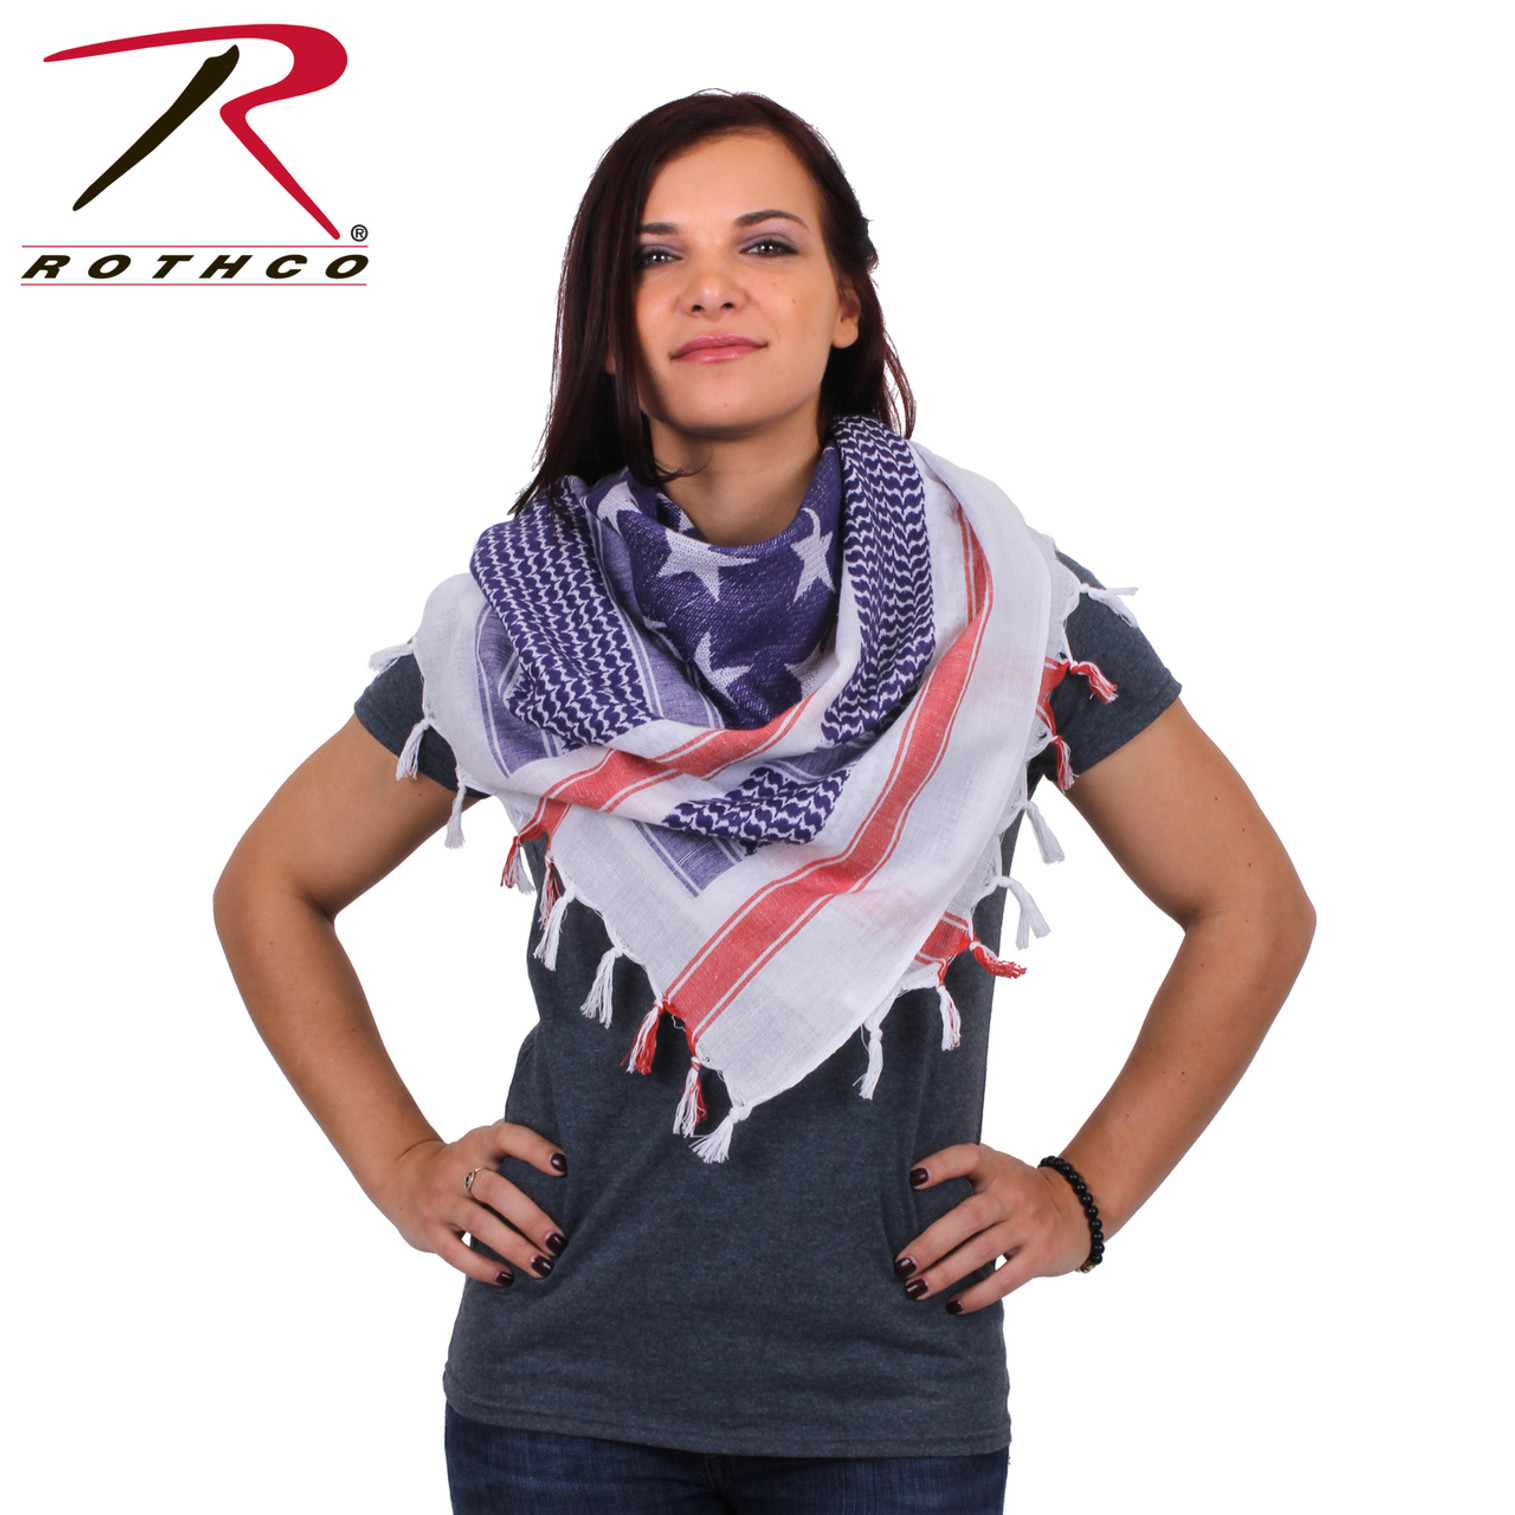 Rothco Stars and Stripes US Flag Shemagh Tactical Desert Keffiyeh Scarf - Red, White & Blue